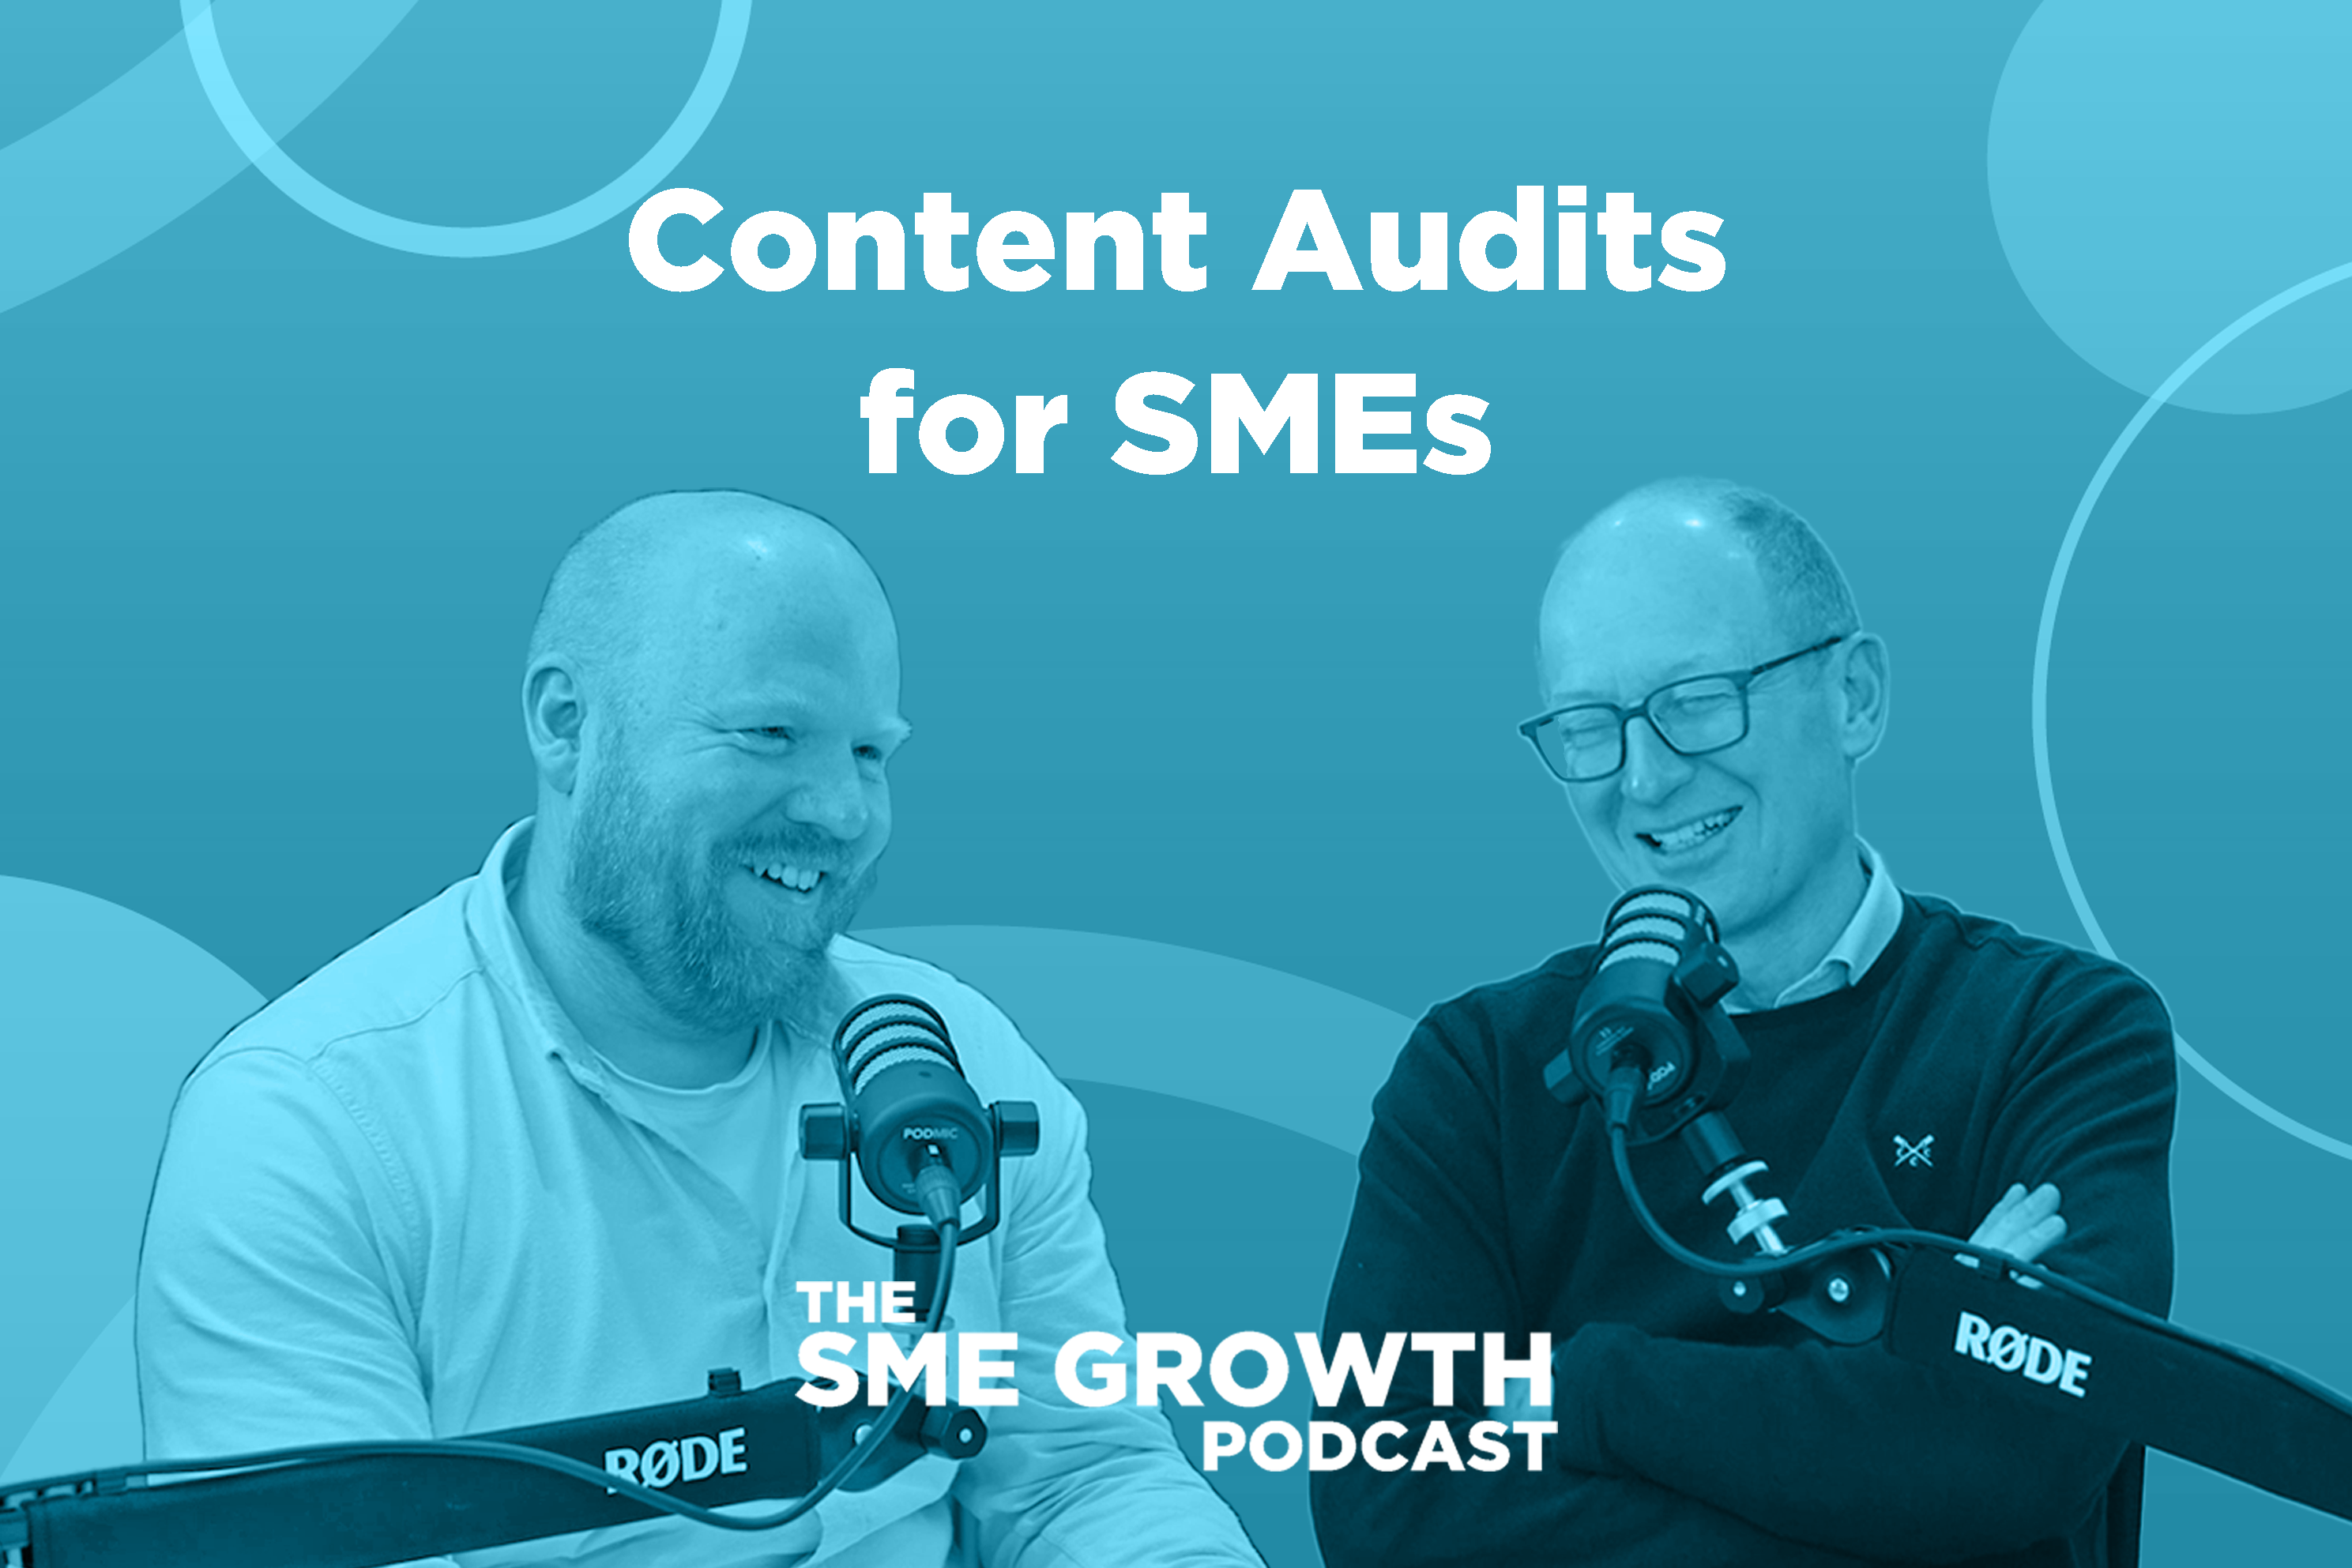 Content audits for SMEs, The SME Growth Podcast, two males sit talking into microphones with blue overlay